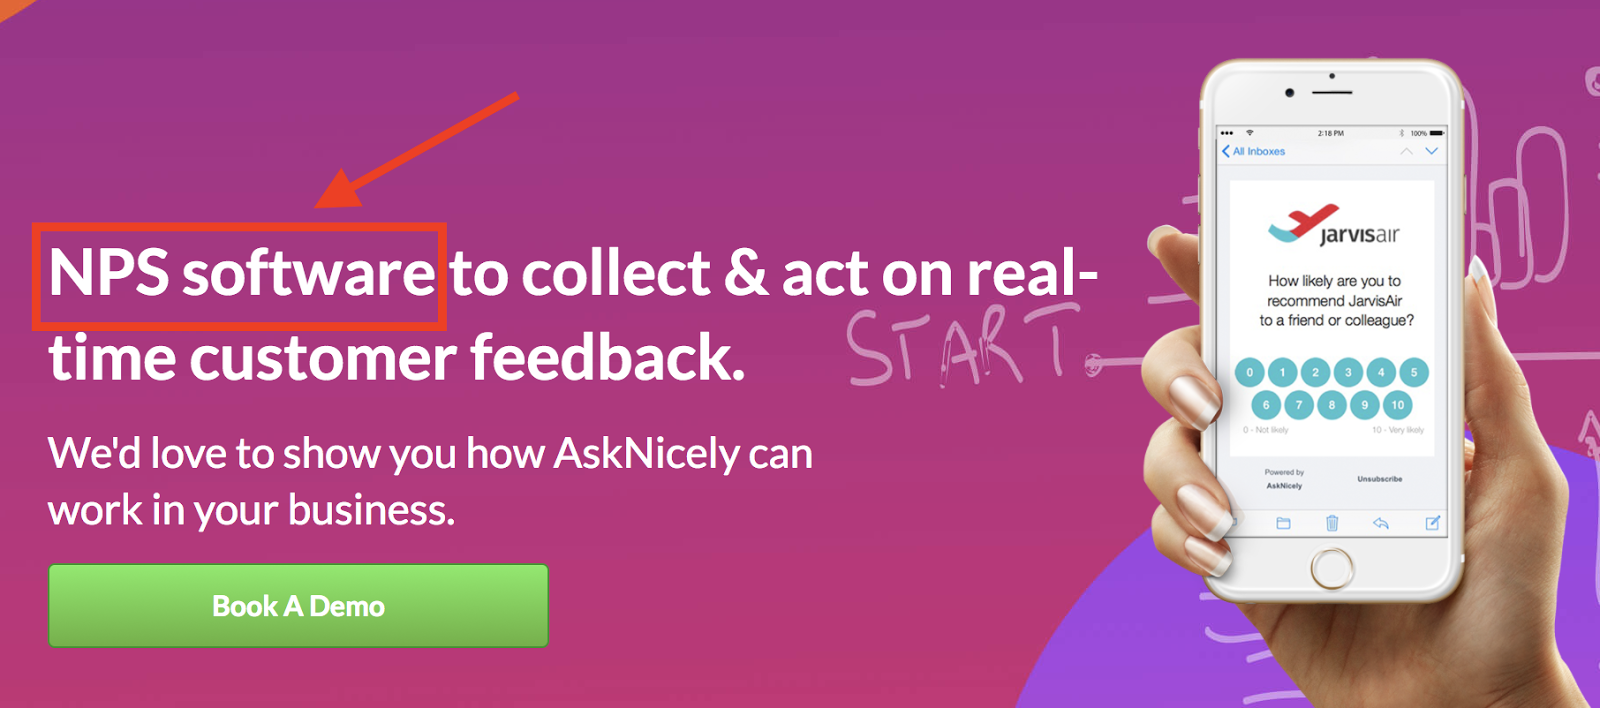 AskNicely NPS software landing page